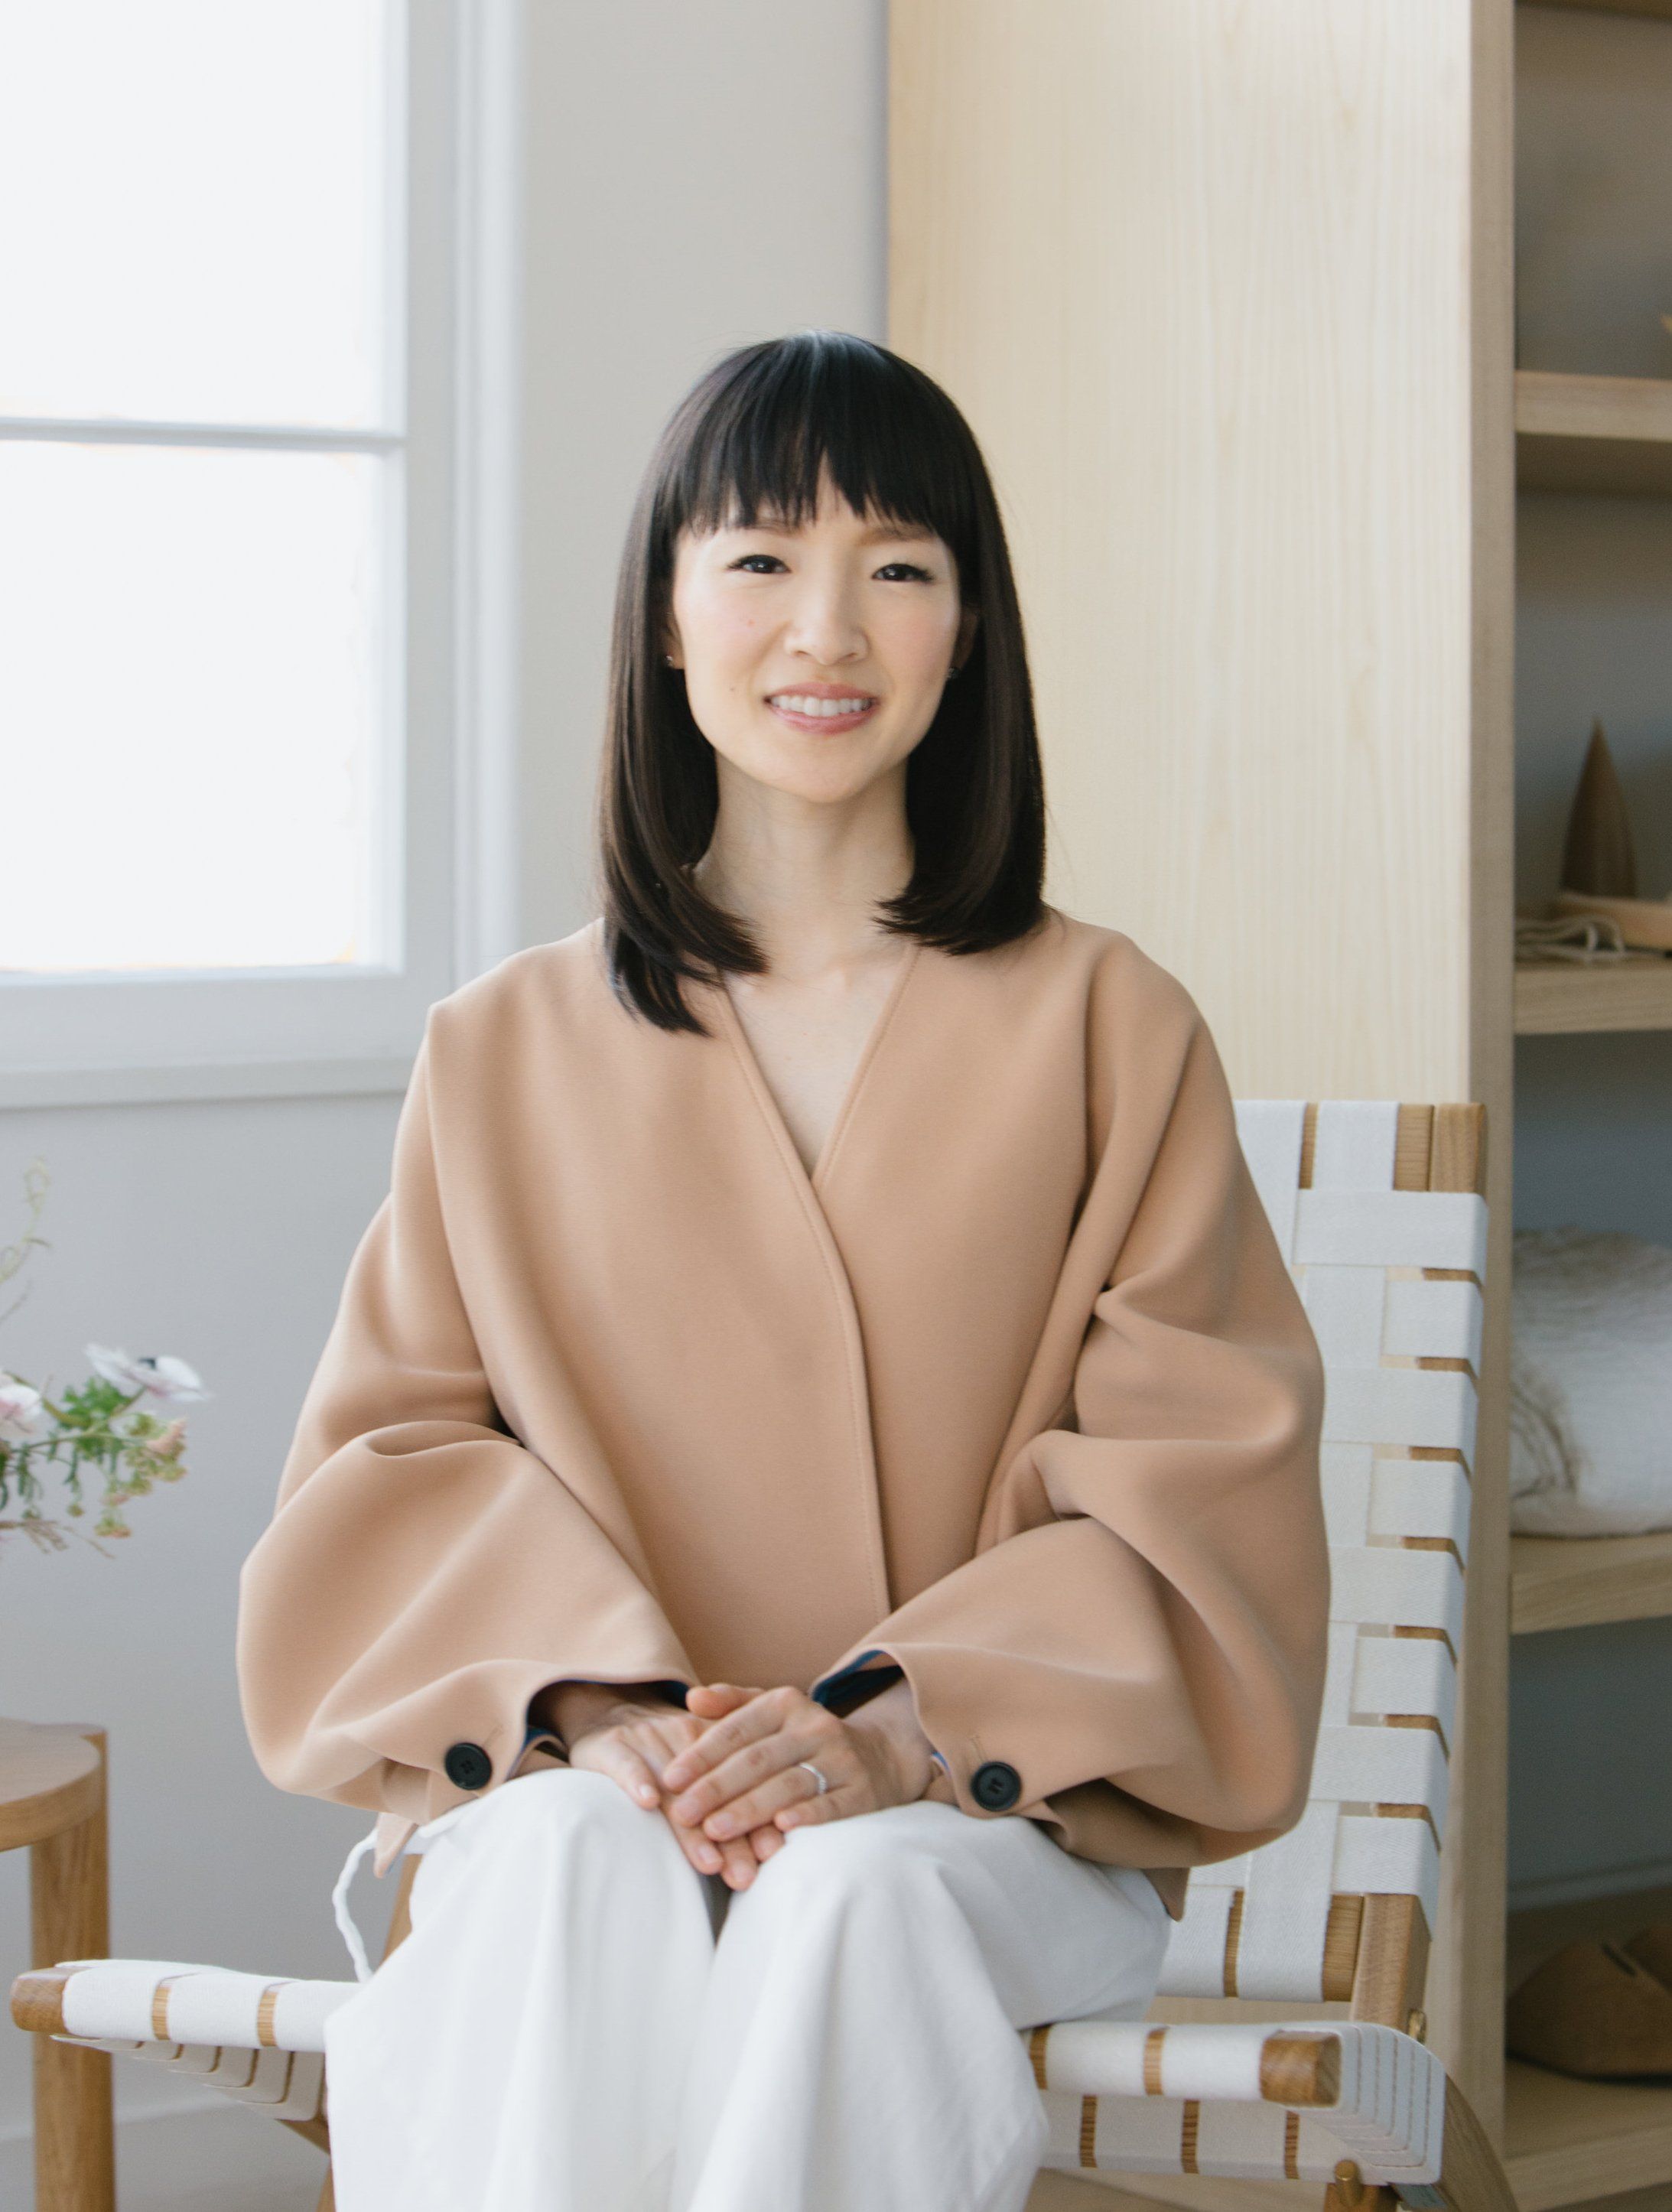 Here's How to Fold Clothes Exactly Like Marie Kondo